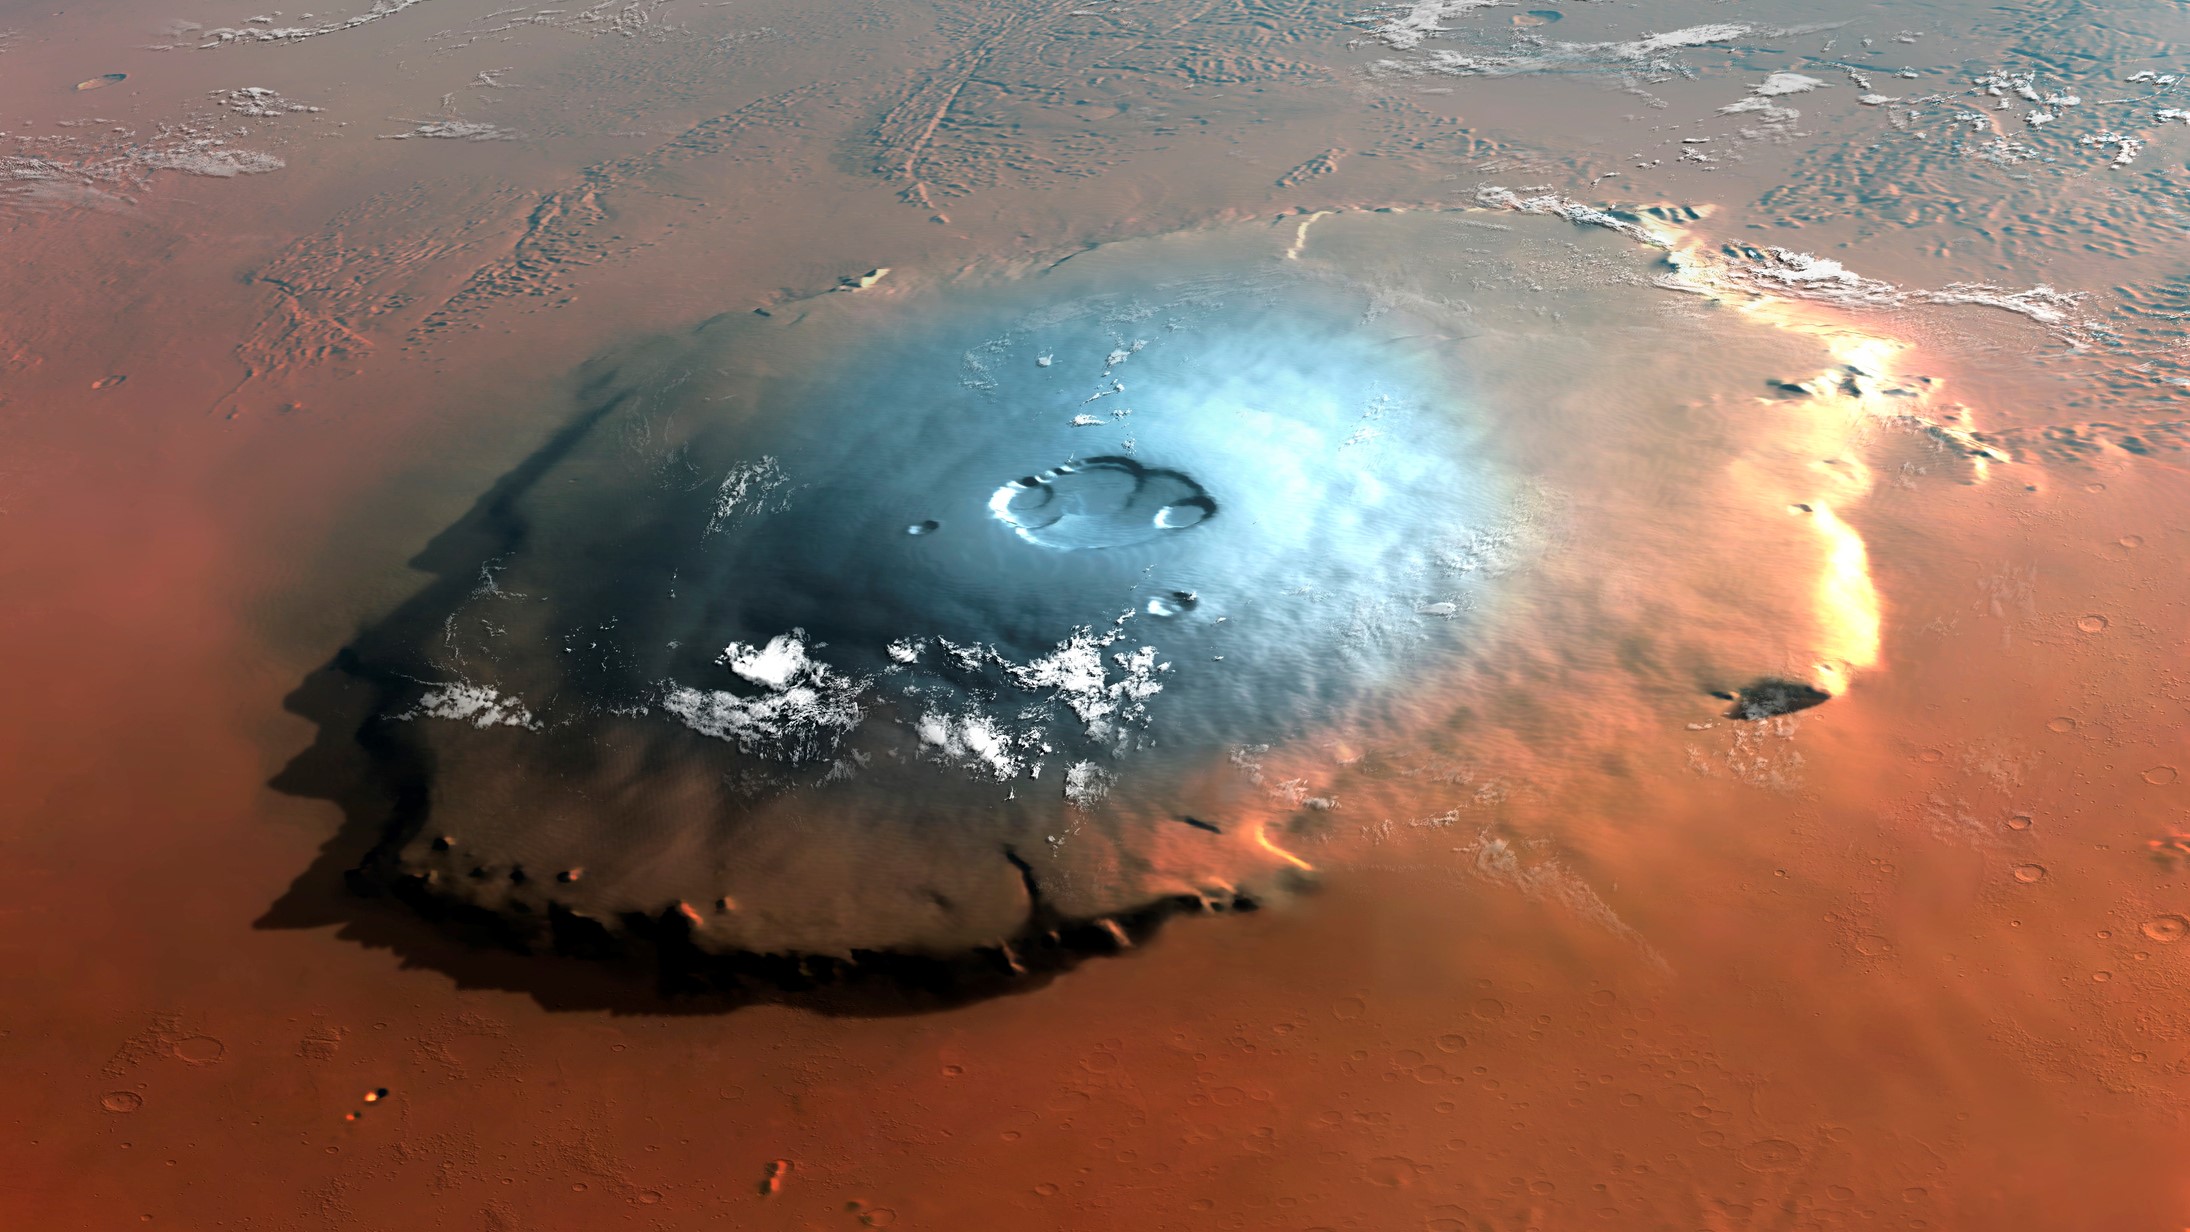 Olympus mons is the biggest volcano ever discovered in the solar system. This artist’s illustration depicts what the shield volcano looks like on Mars.